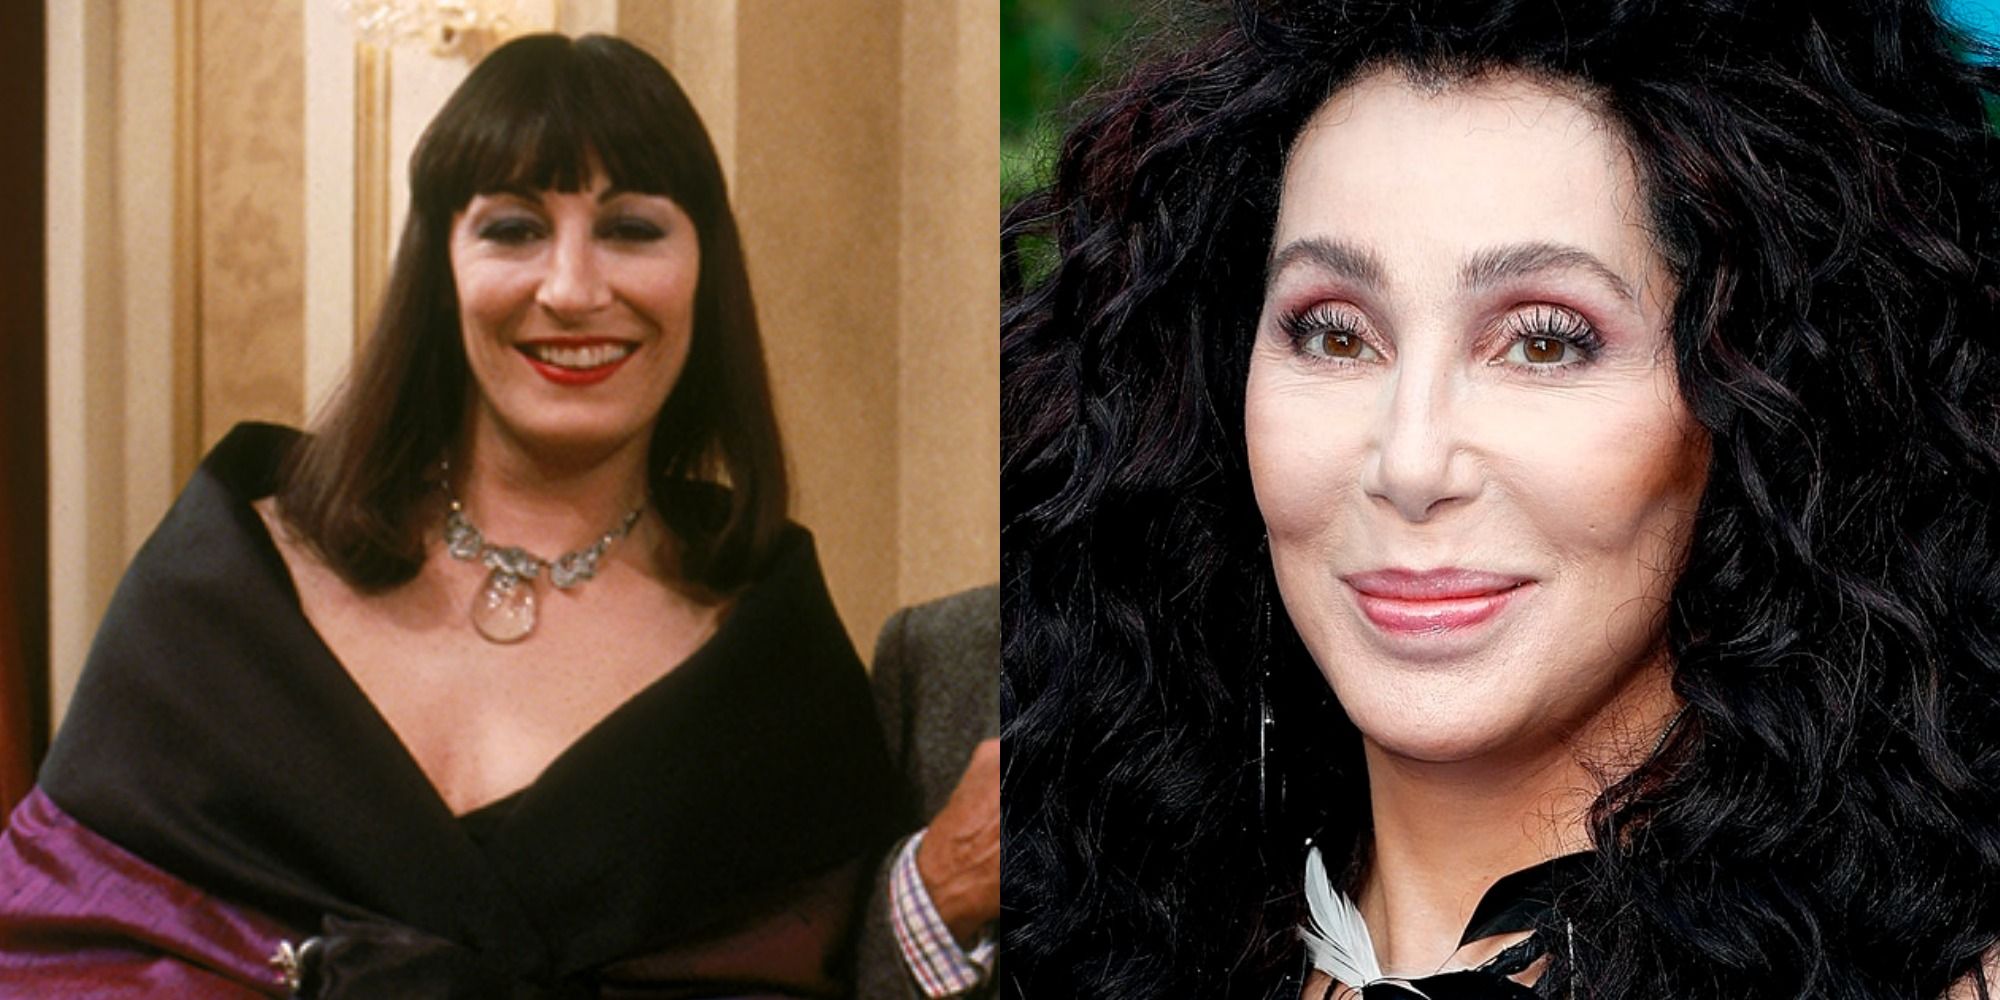 A side-by-side comparison between Anjelica Huston as the Grand High Witch/Eva Ernst and Cher for The Witches (1990)